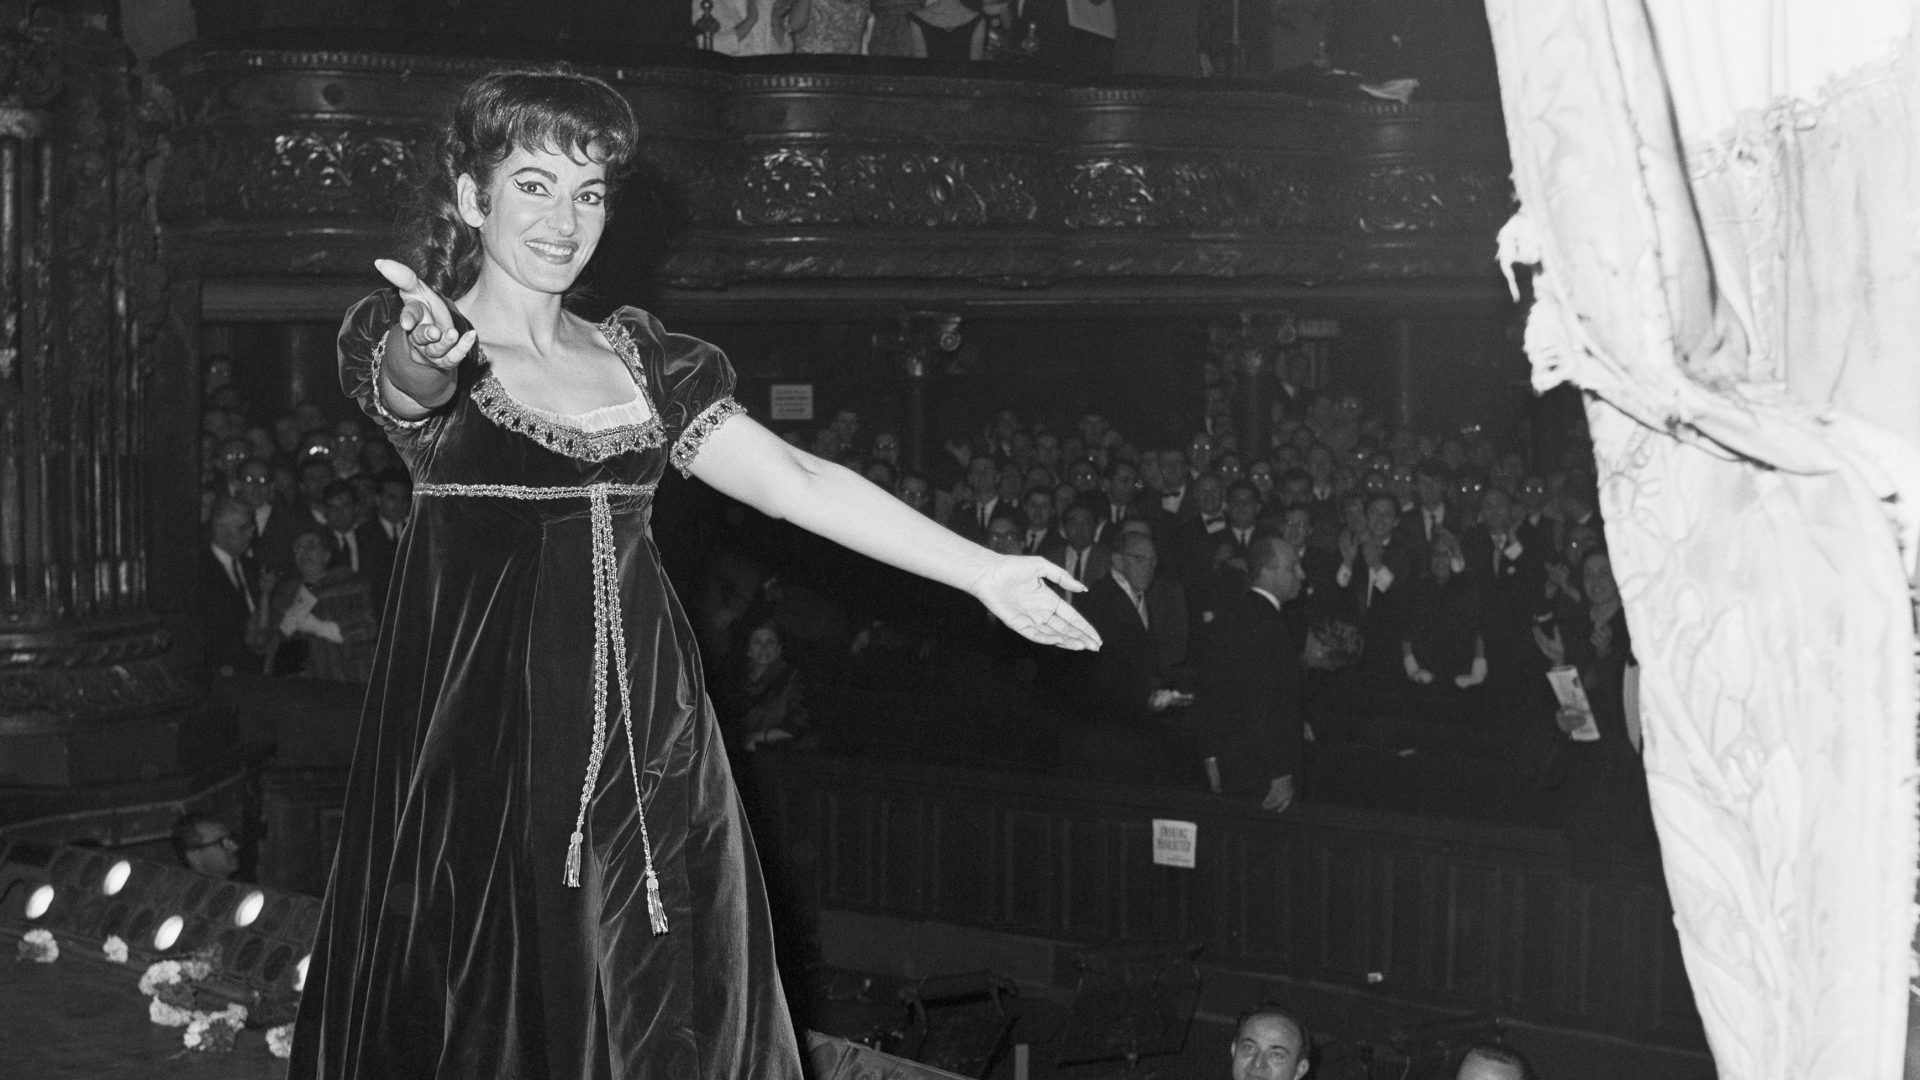 The incomparable Maria Callas, walking offstage after a performance in 1965. Photo: Bettman Archive/Getty Images.